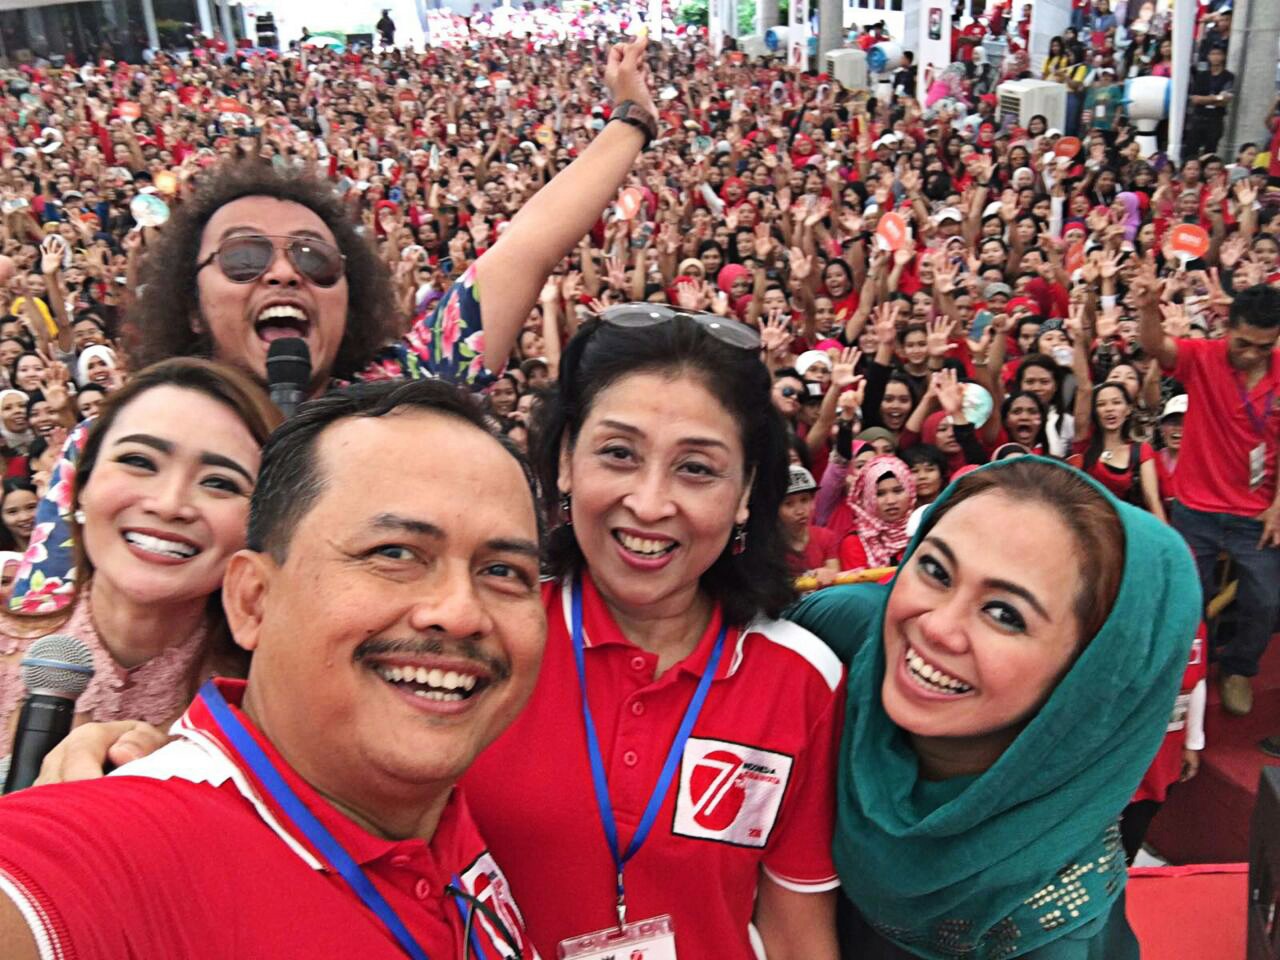  A group of five people are taking a selfie in front of a large crowd. The people in the selfie are all smiling and waving.